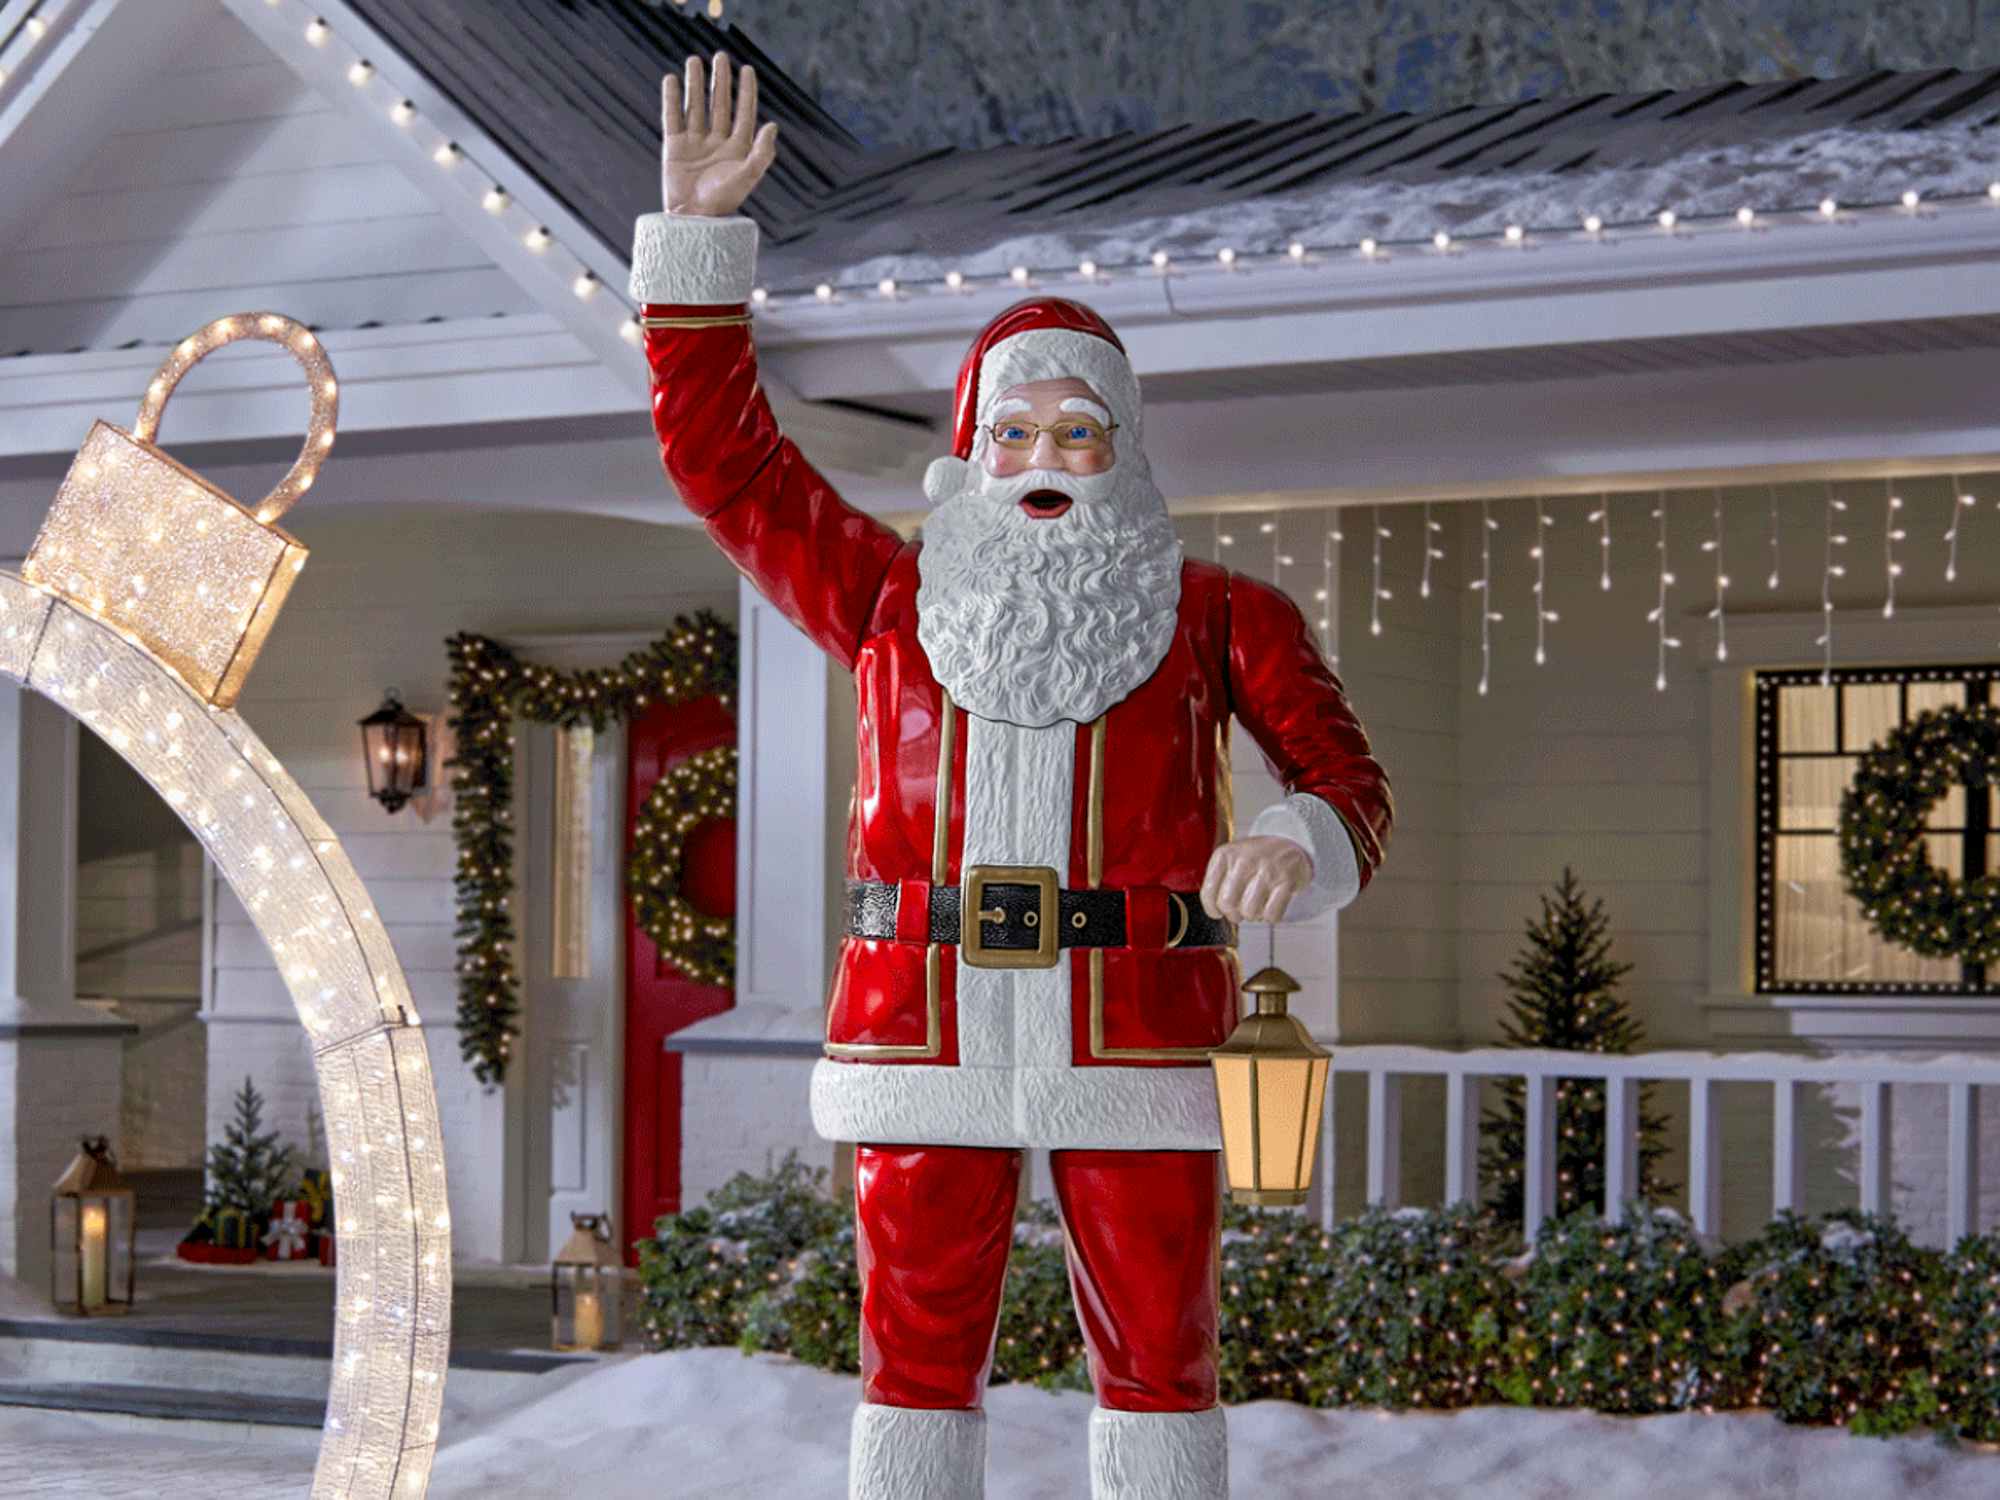 Home Depot Christmas Decorations are 75% Off and Selling FAST - The ...